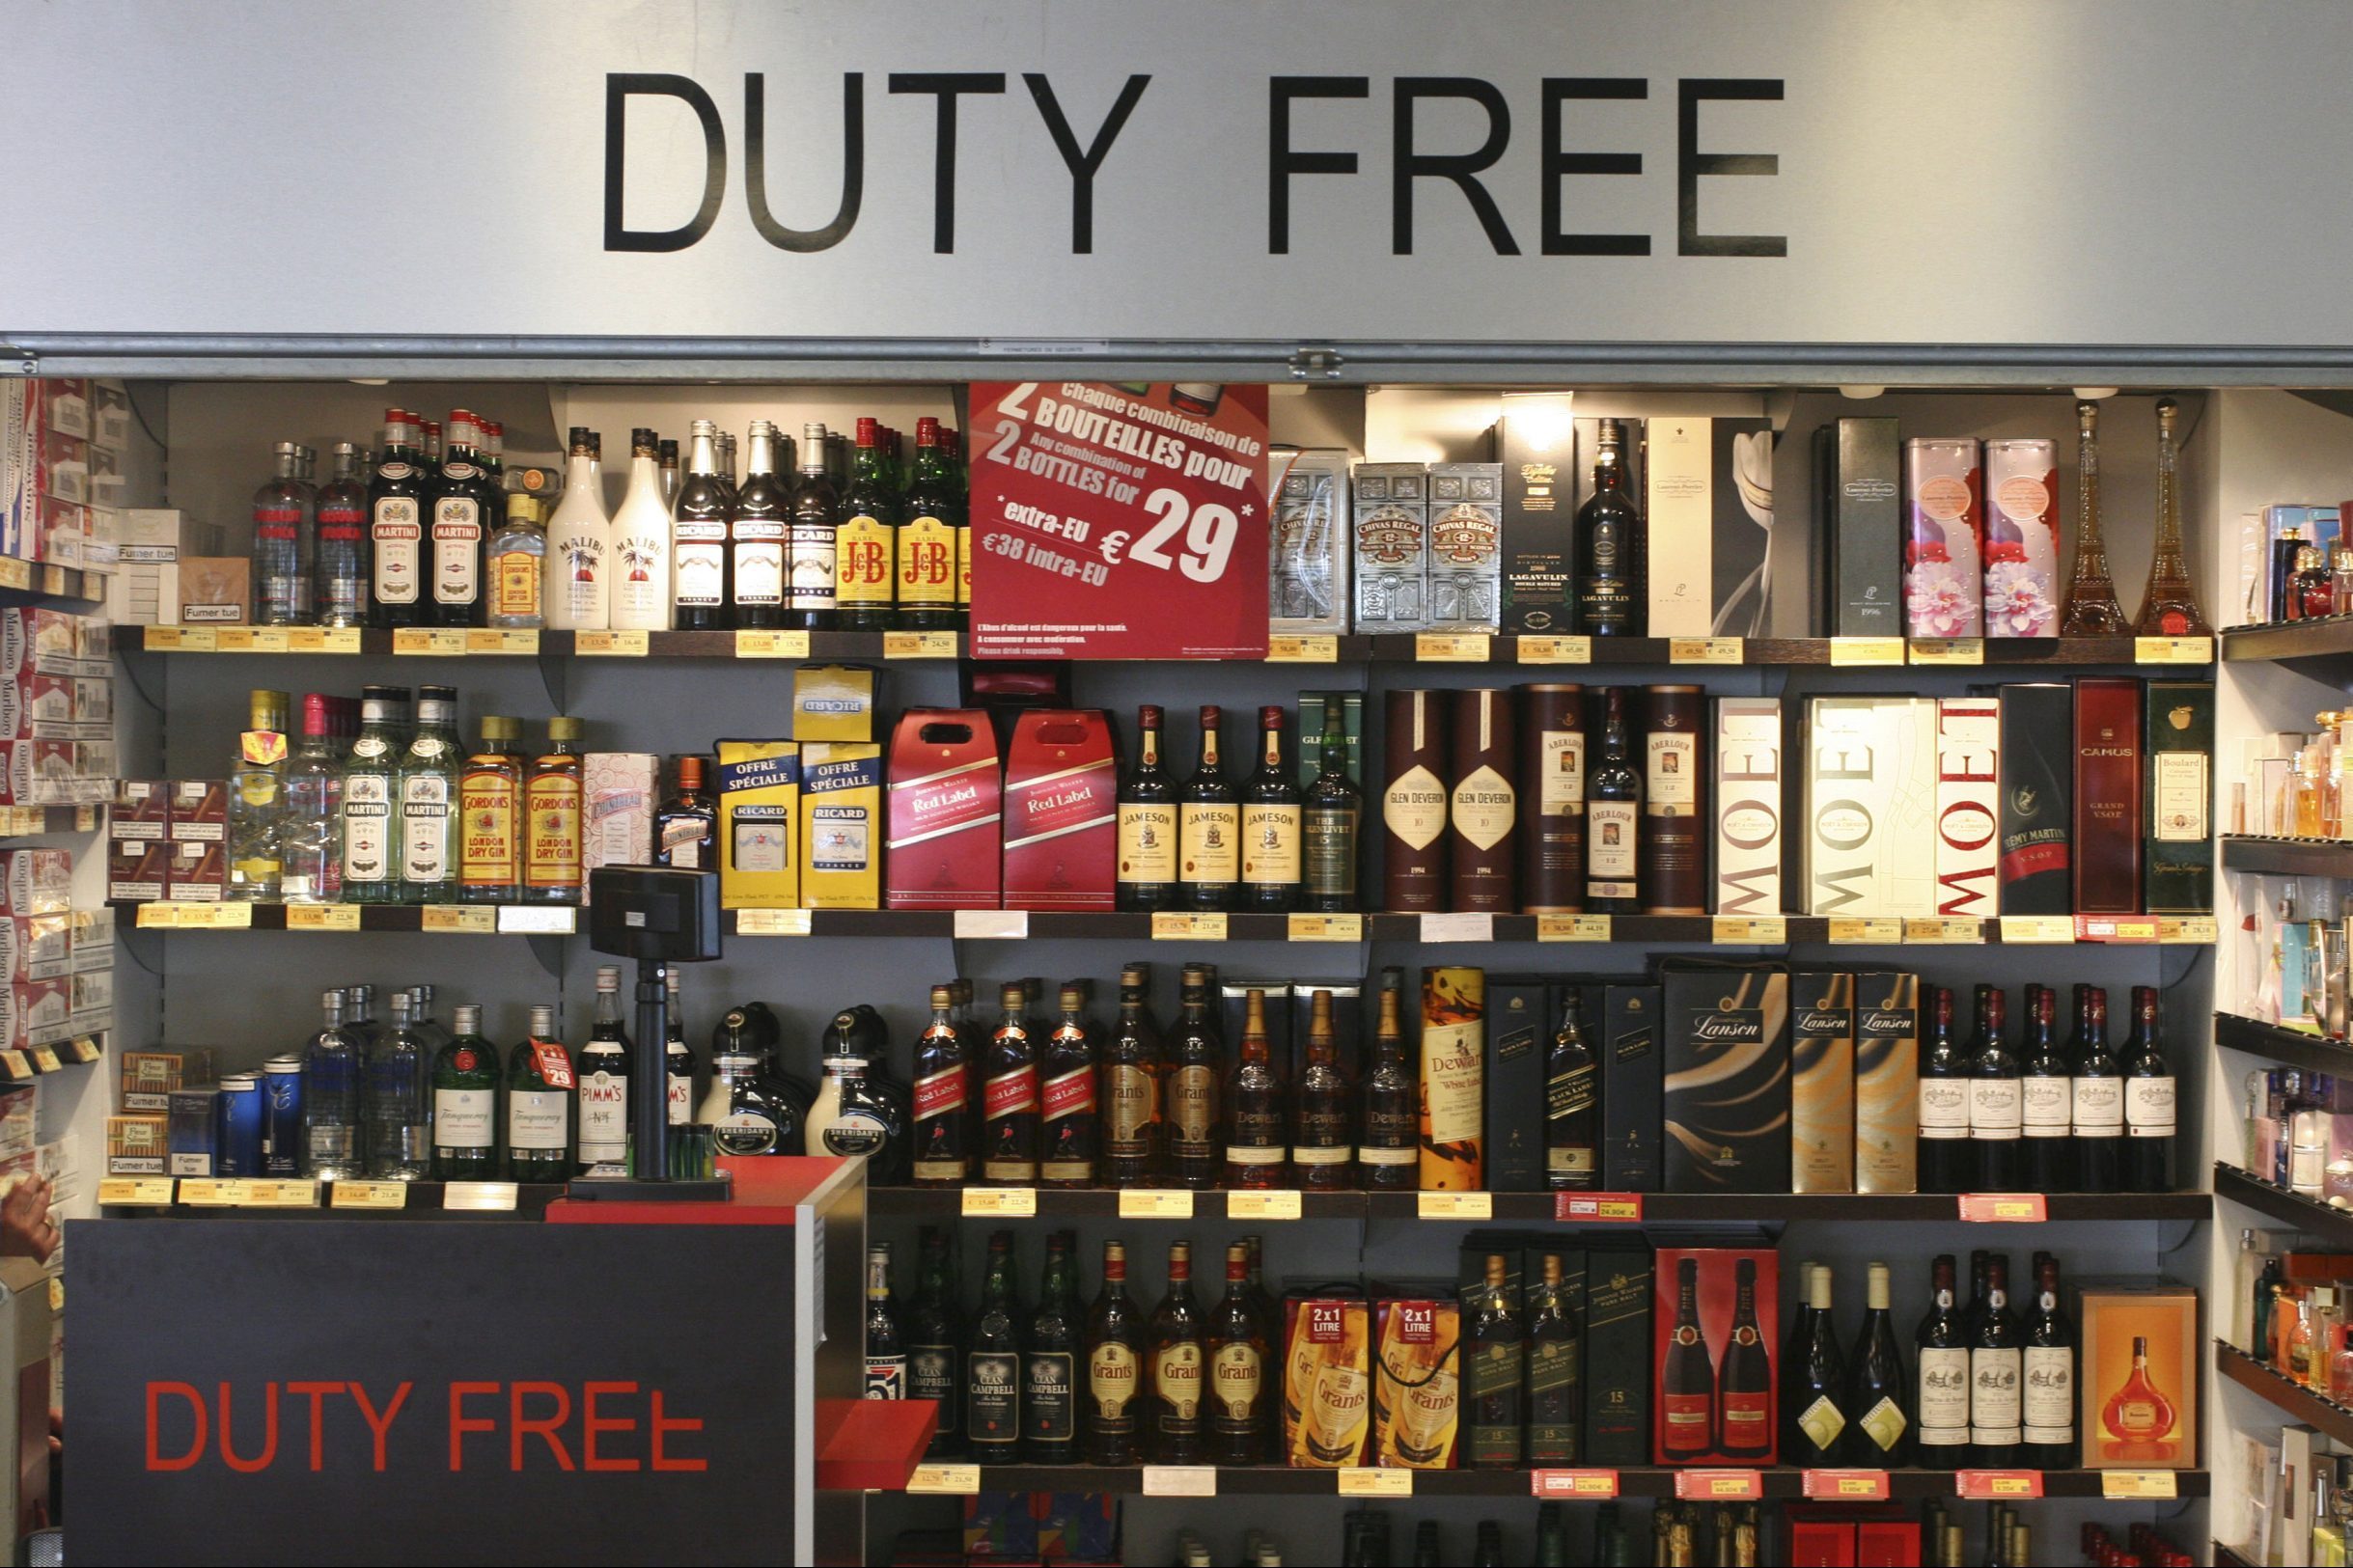 <p>If you've ever flown internationally (or passed through an international terminal), you've likely seen the brightly-lit consumer paradise of a duty-free shop.</p> <p>But what is a duty-free shop? These are stores that sell all kinds of products for which a "duty" (a local import tax or fee placed on goods by government entities) is not included. Normally, buying products in a duty-free shop allows travelers to save money on liquor, tobacco, fragrances, cosmetics, luxury items, candy, and more.</p> <p>Note: When traveling internationally and shopping duty-free (a great <a href="https://www.rd.com/list/airport-layover/">thing to do on your airport layover</a>), the cashier at the register is going to ask to see your boarding pass to verify travel out of the country. Travelers leaving the United States for at least 48 hours may shop duty-free.</p>